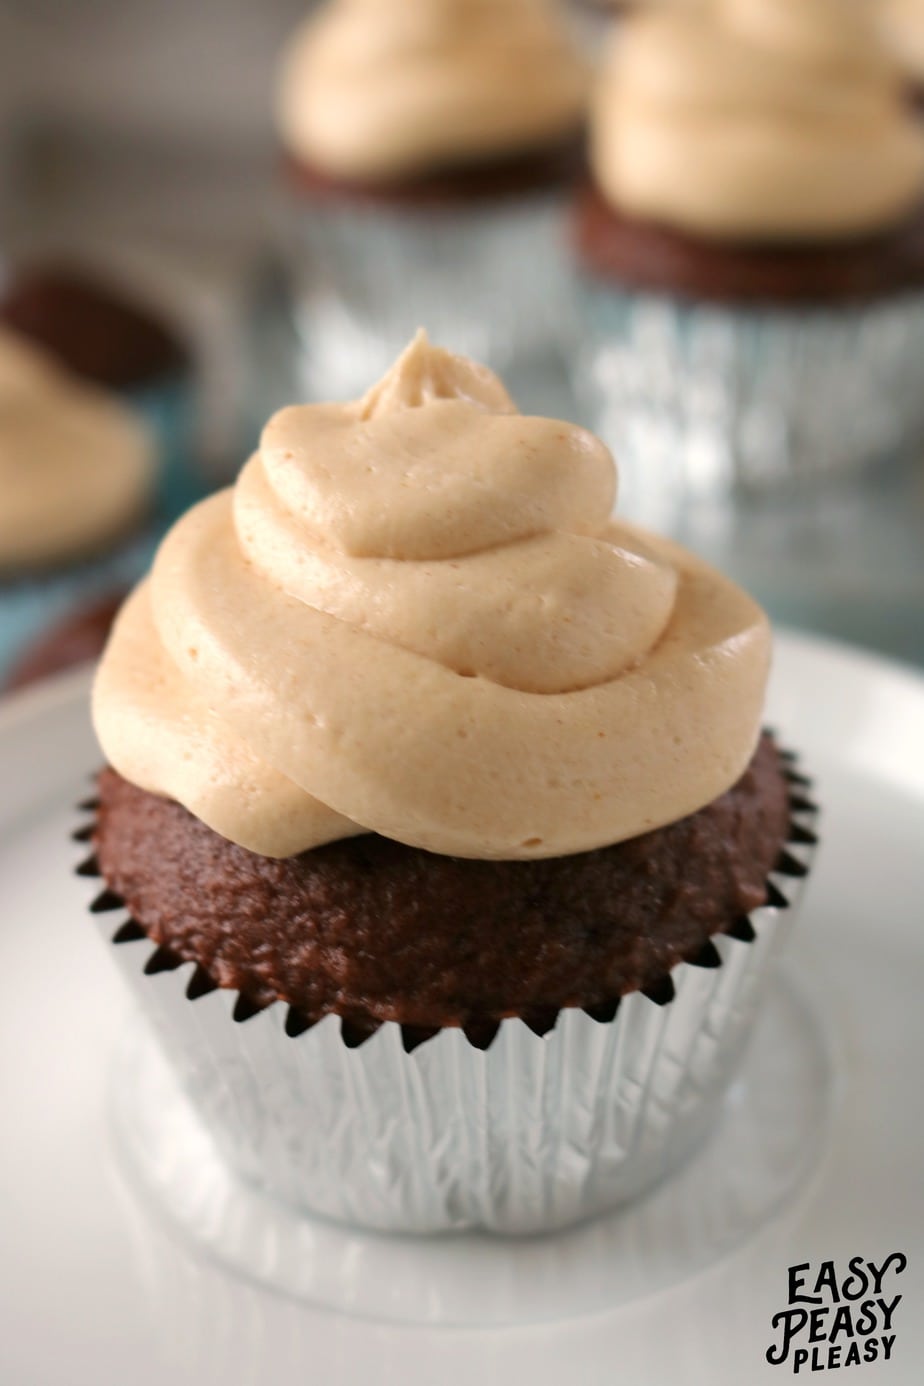 Make your boxed cupcakes so much better with this delectable homemade peanut butter Cream Cheese frosting. #easyfrosting #frosting #peanutbutterfrosting #creamcheese